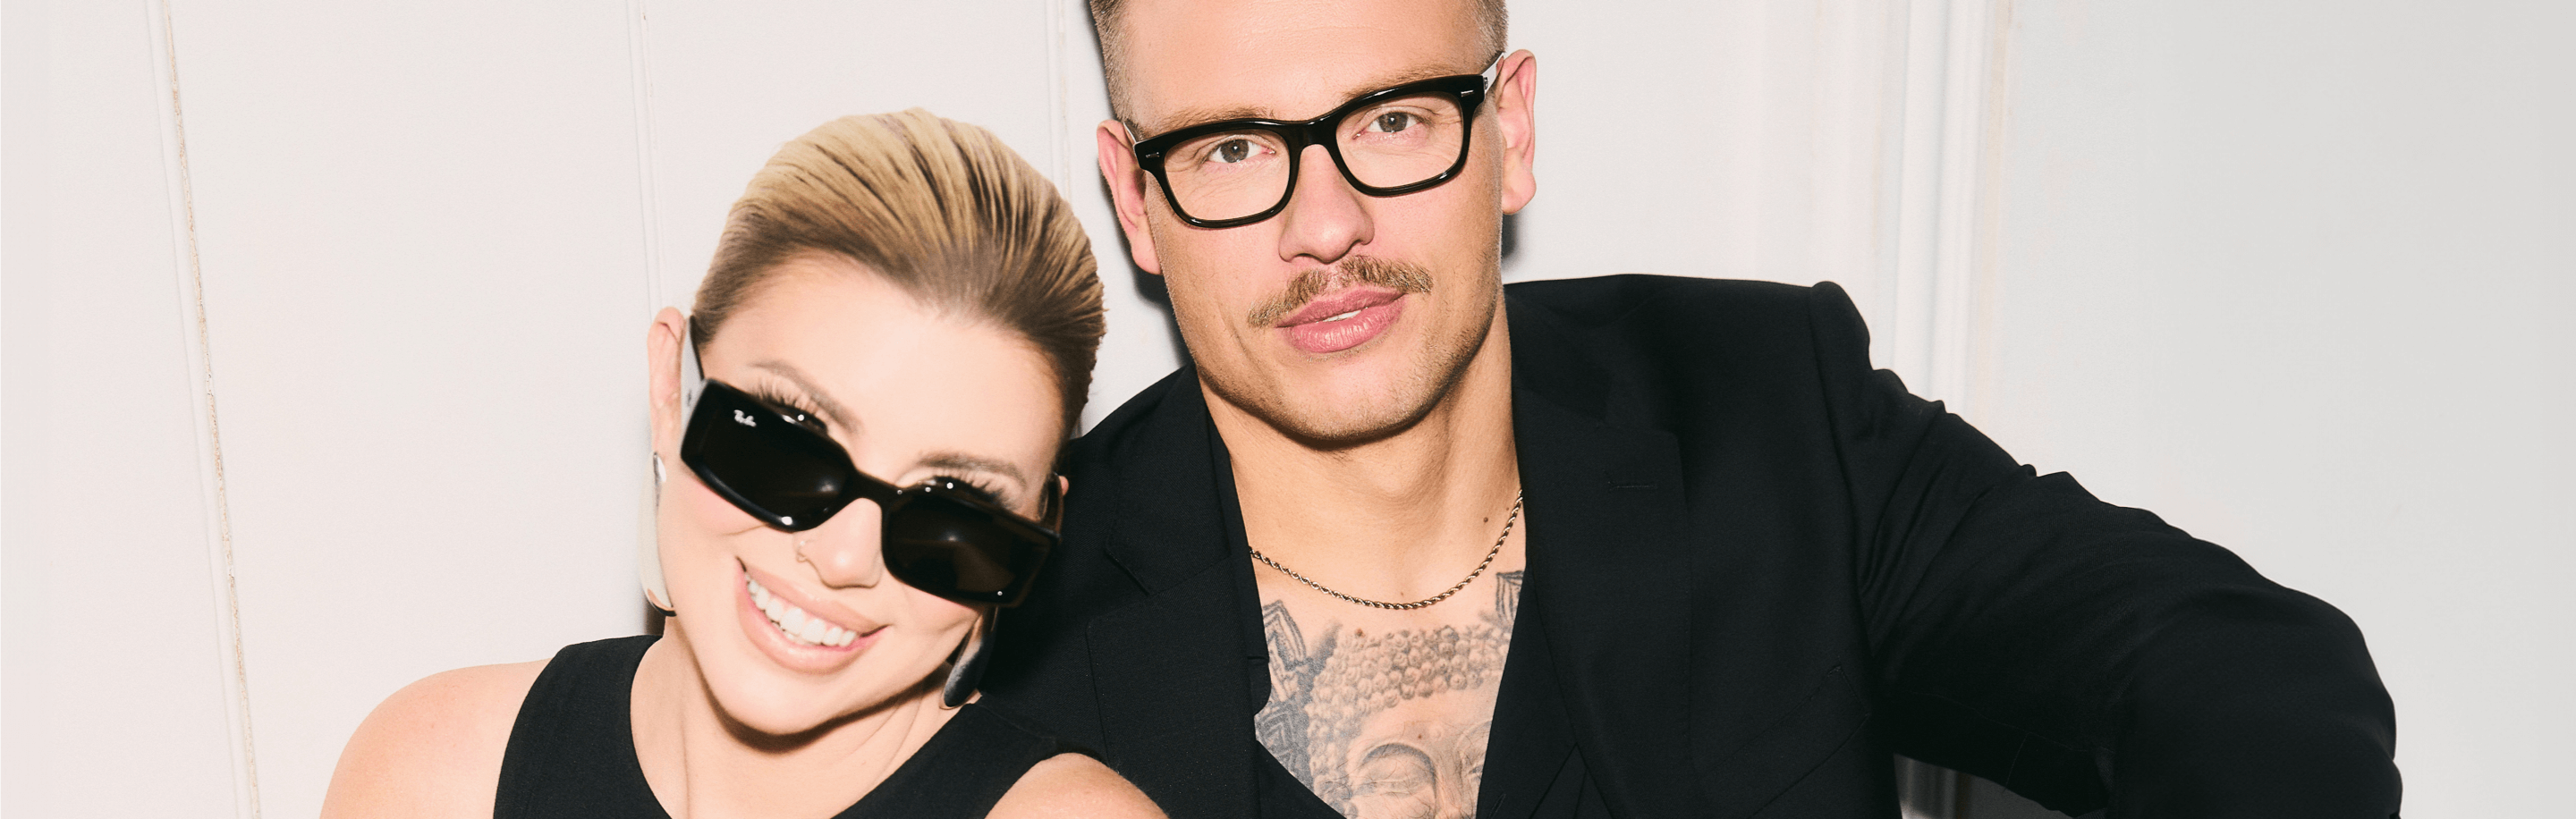 Olivia and Alex Bowen wearing Vision Express eyewear and styled as different celebrities